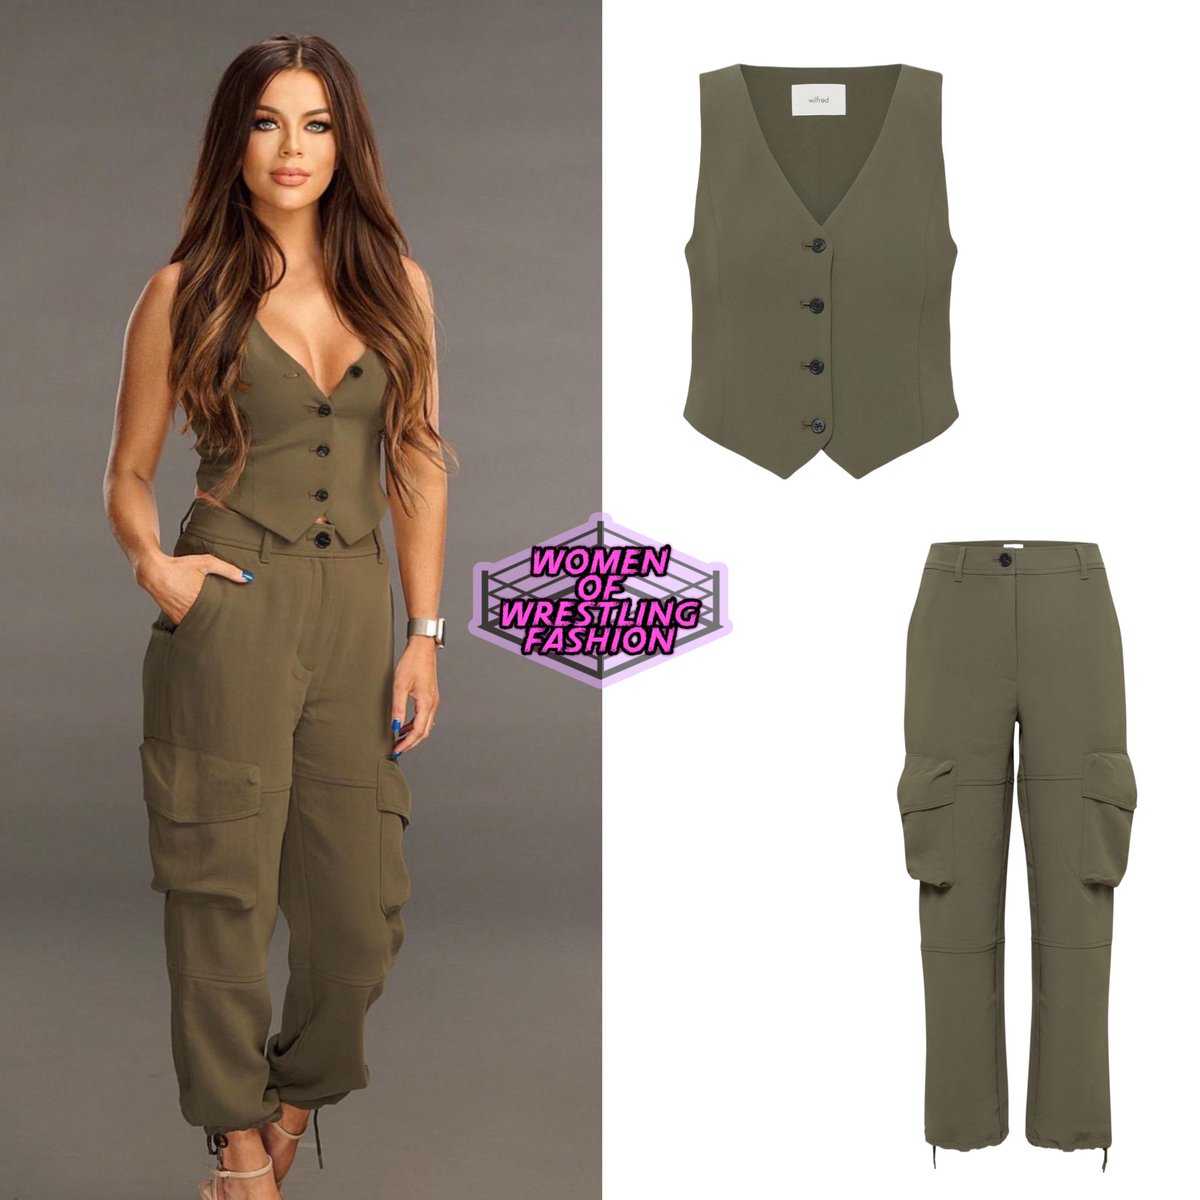 For #WWERaw, Jackie wore the Wilfred Pacino Vest ($118) & Wilfred New Project Cargo Pant ($148) in Dark Olive from Aritzia